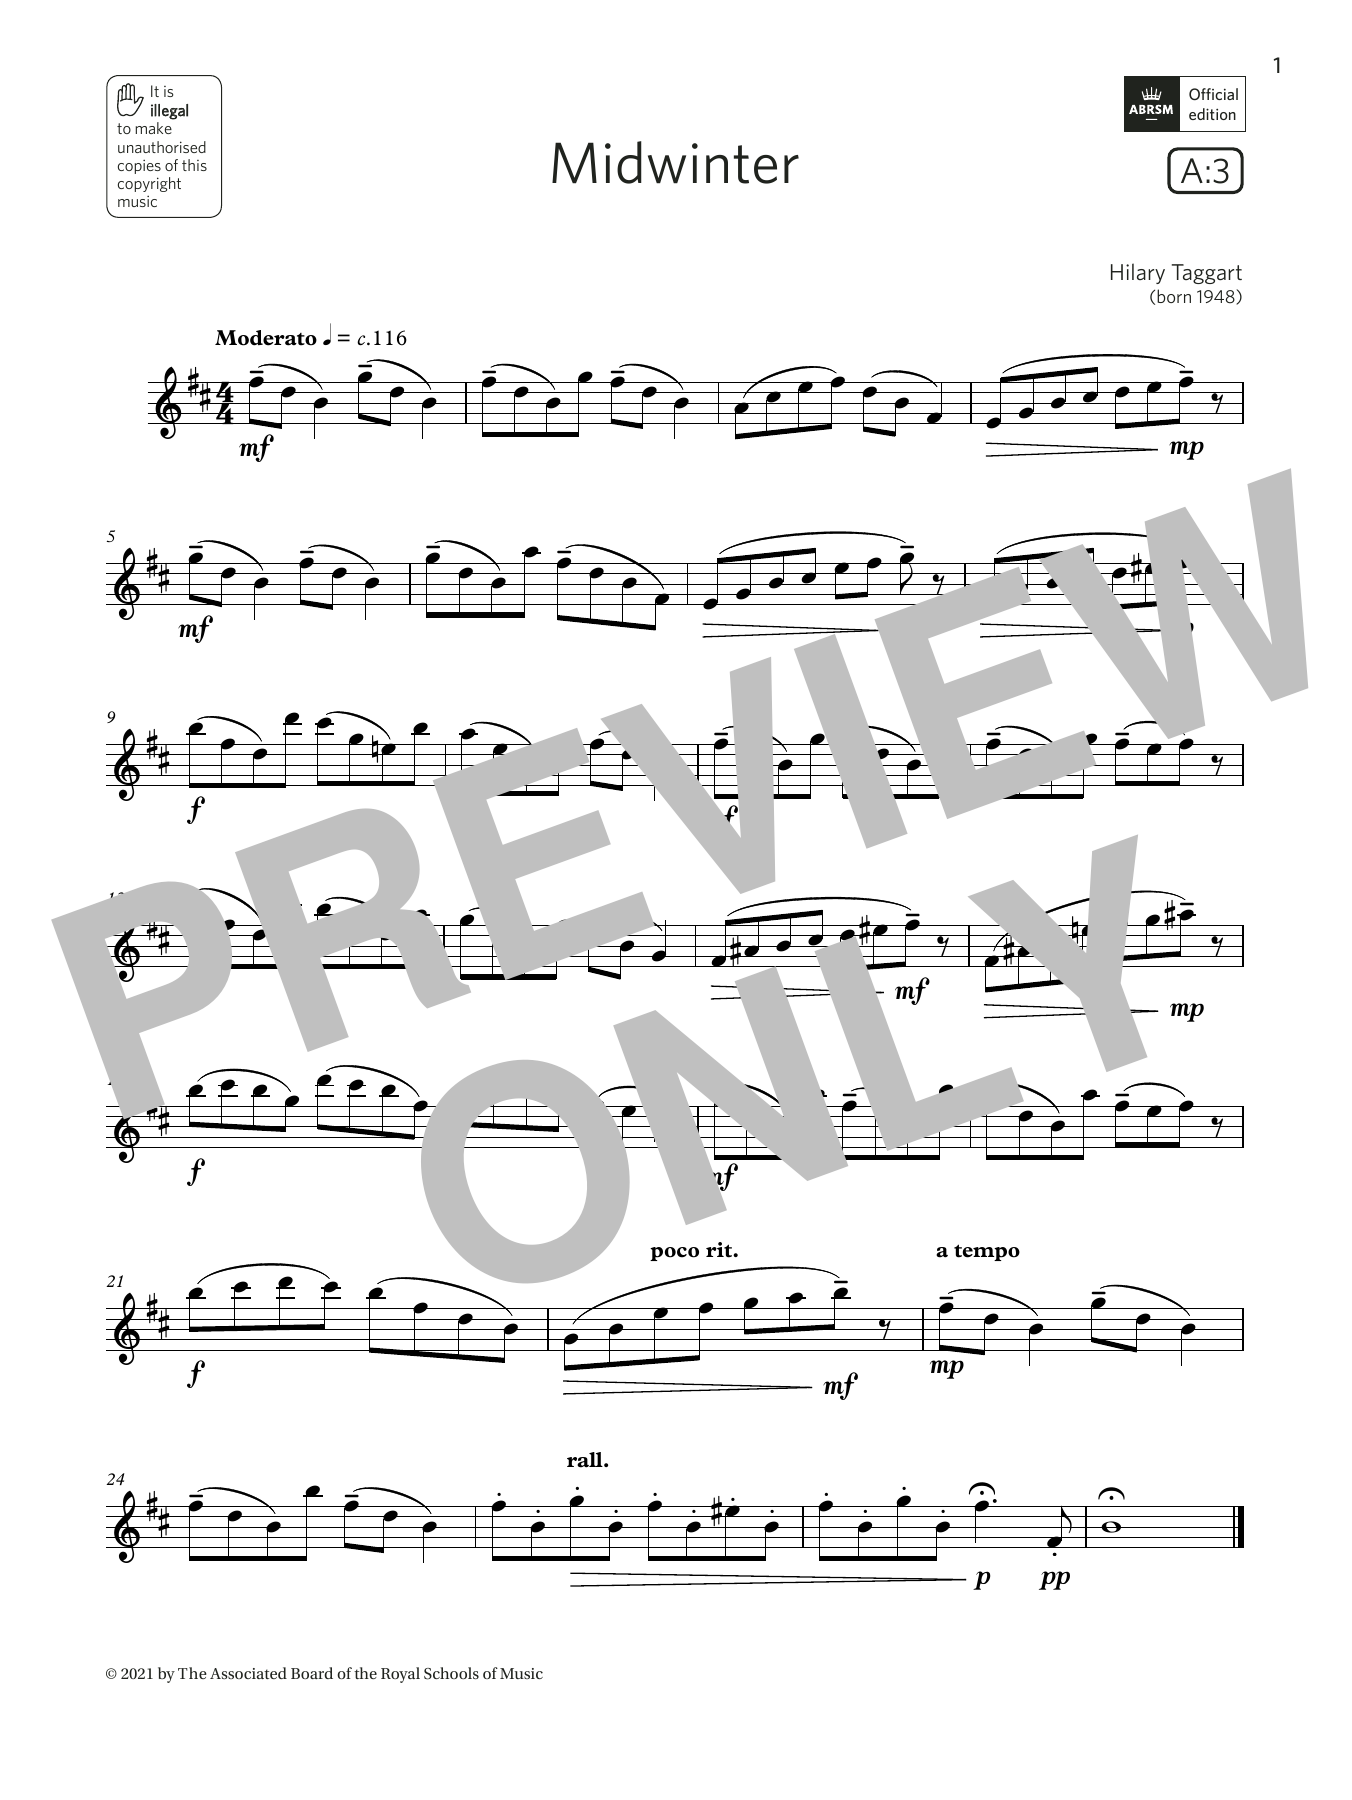 Download Hilary Taggart Midwinter (Grade 4 List A3 from the ABR Sheet Music